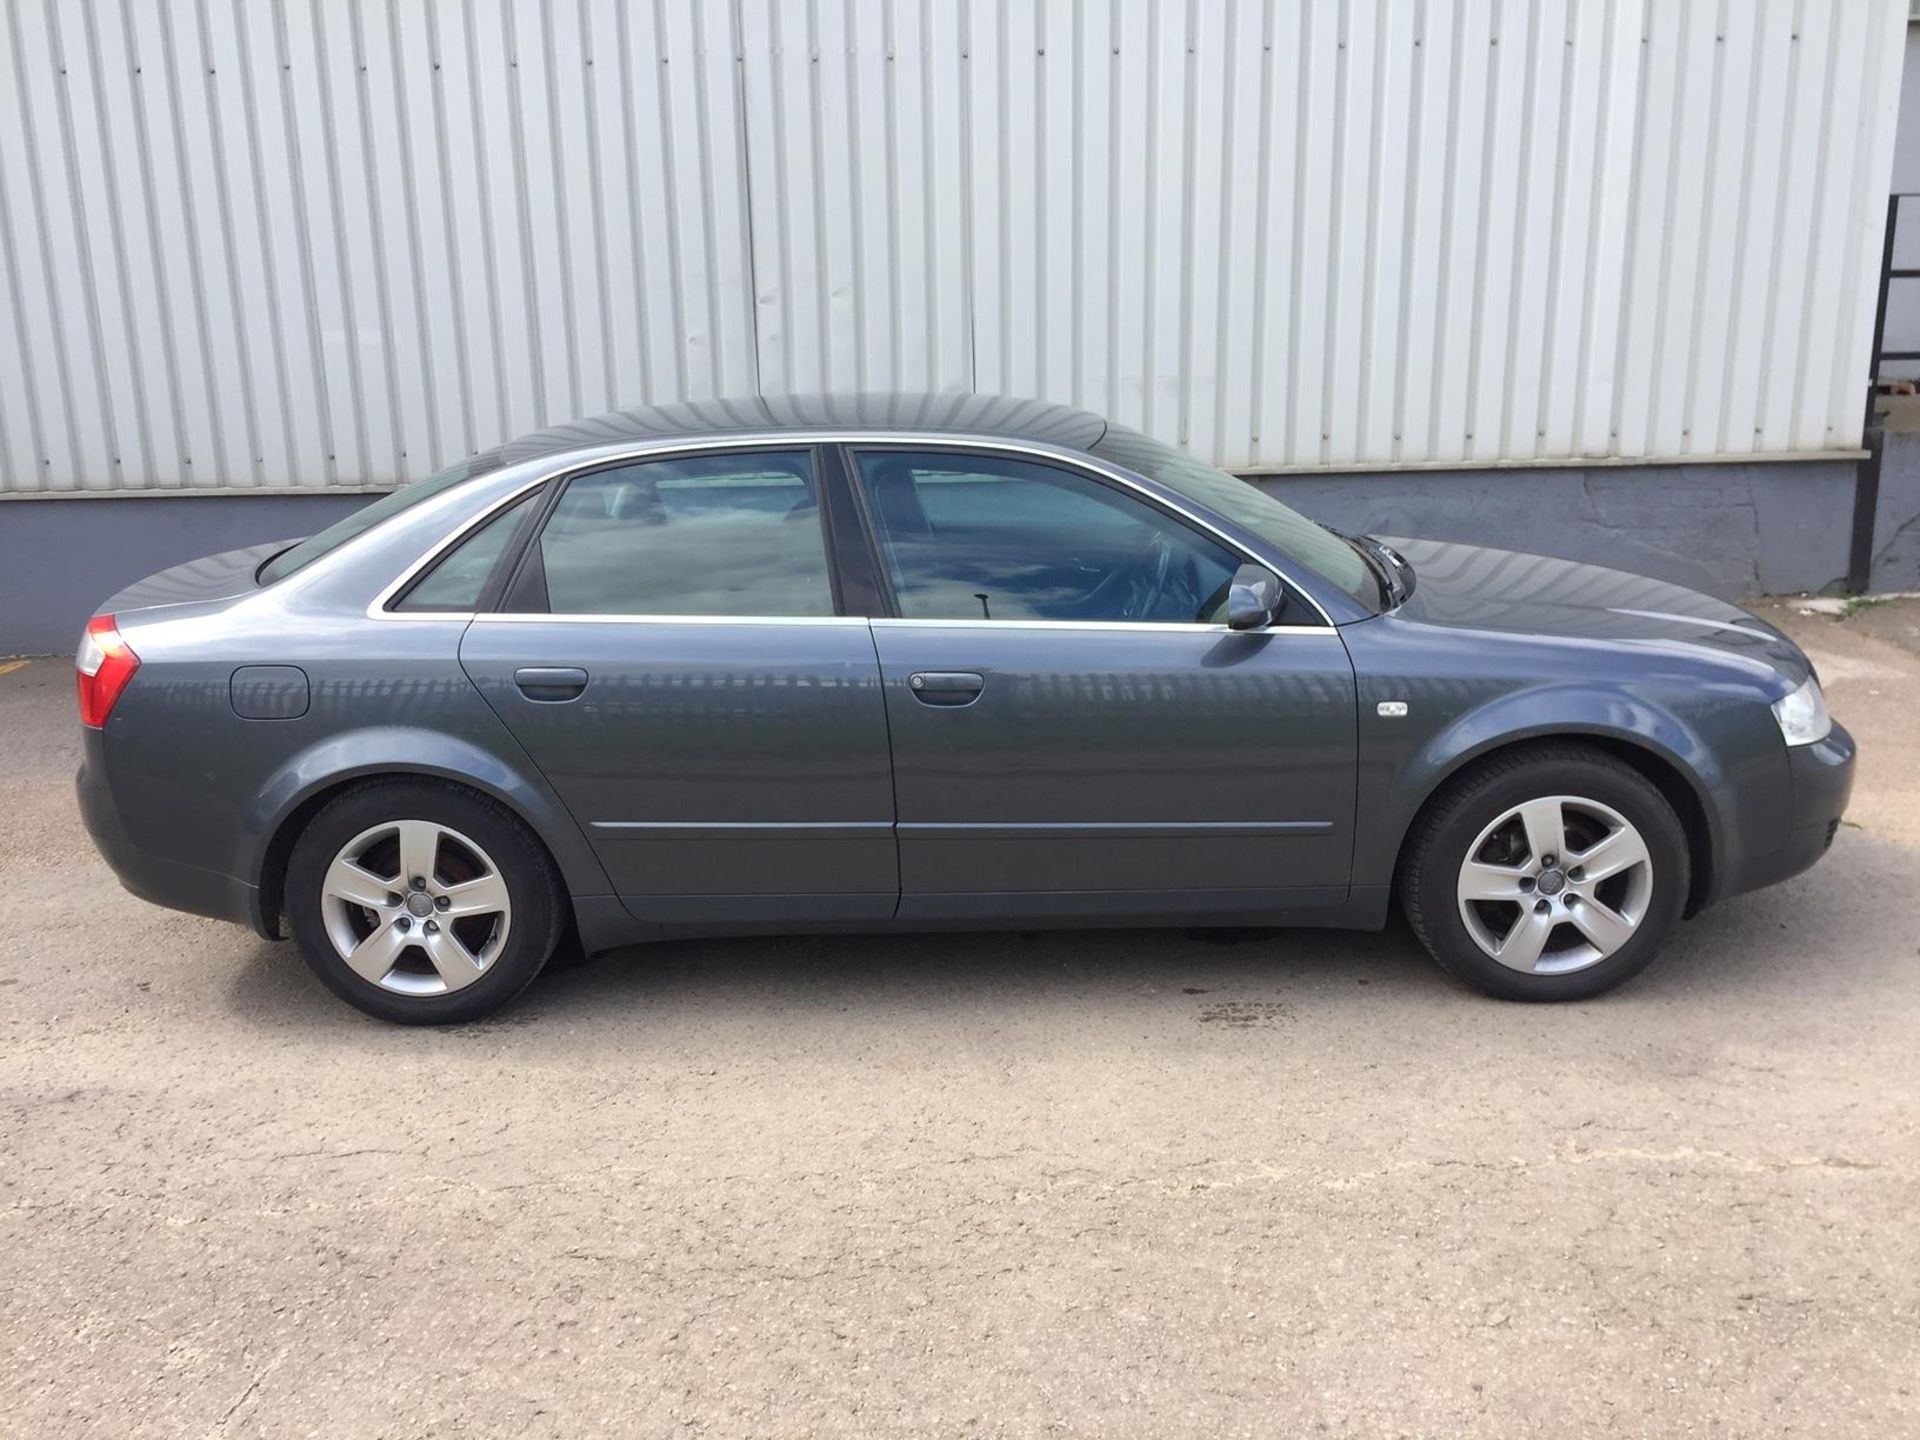 2003 Audi A4 Quattro 1.9 Tdi SE 4 Dr Saloon - CL505 - NO VAT ON THE HAMMER - Location: Corby, Northa - Image 8 of 15